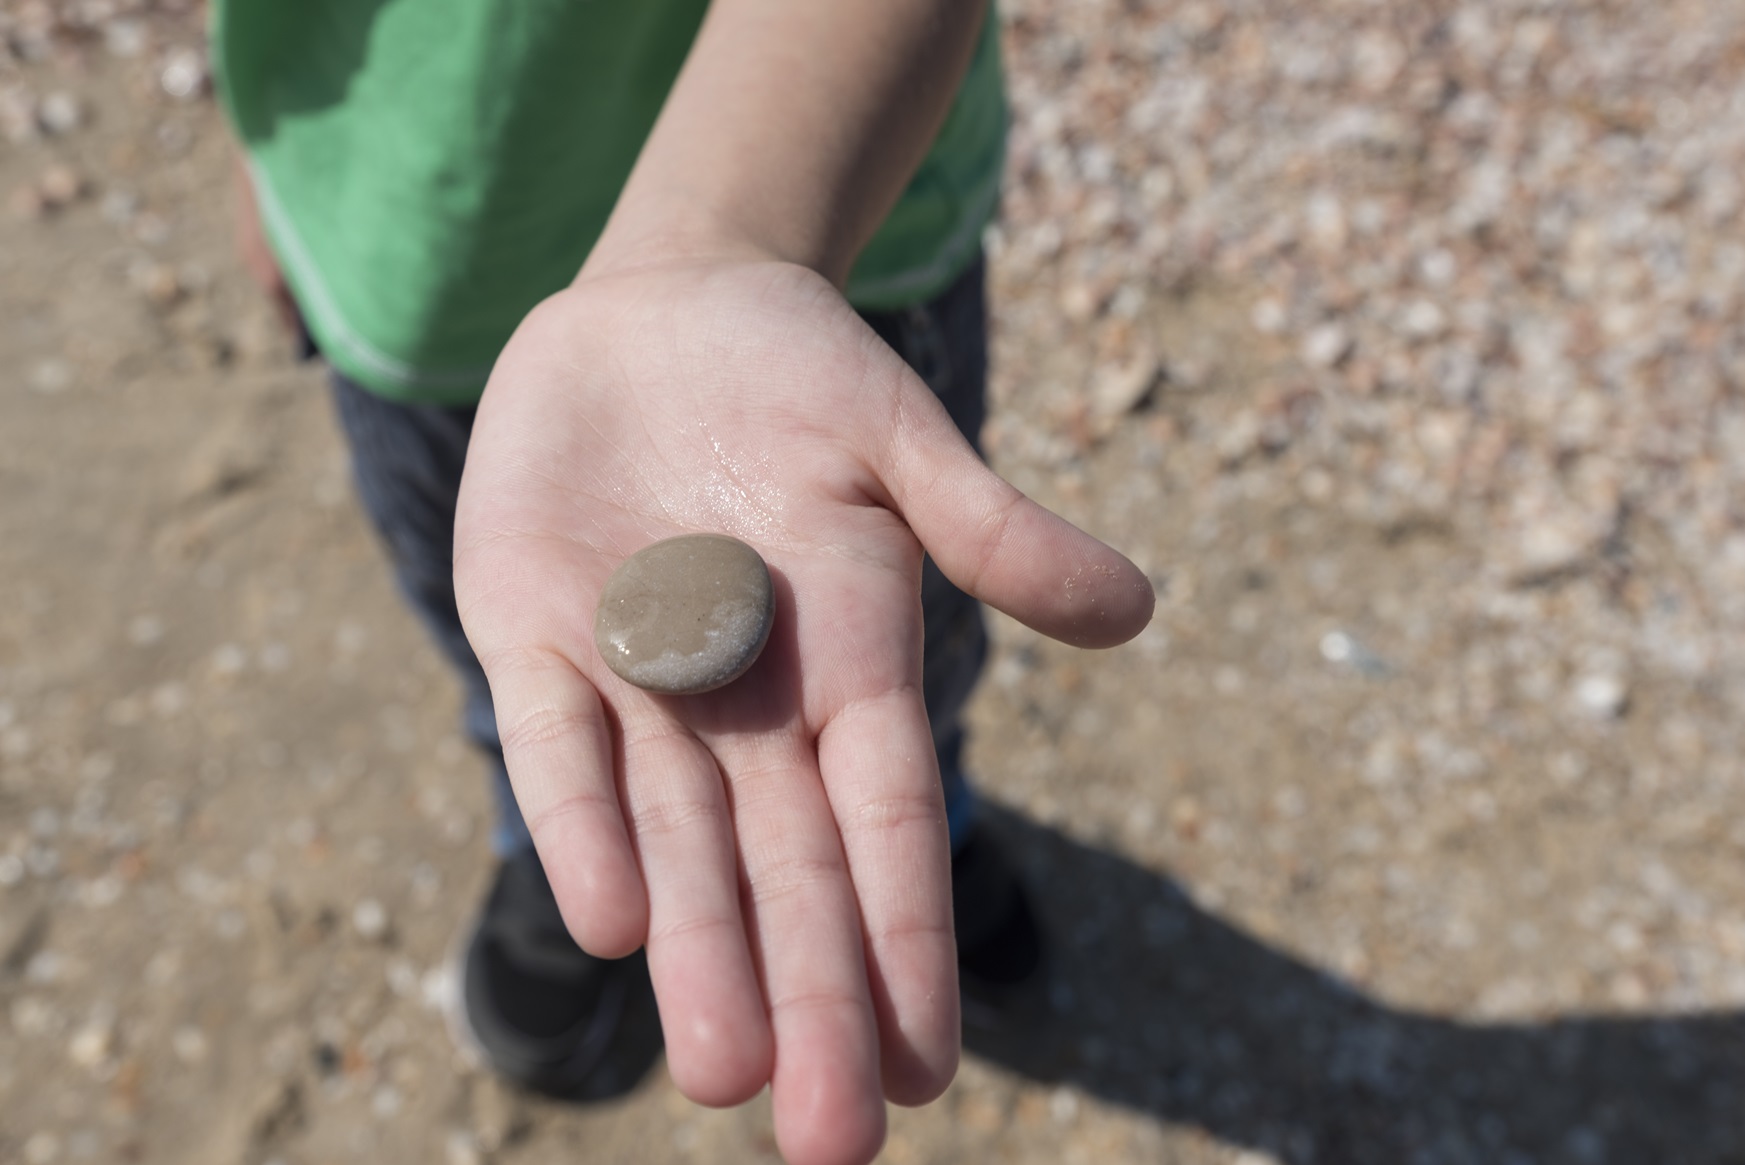 Imagine: A pebble in the palm